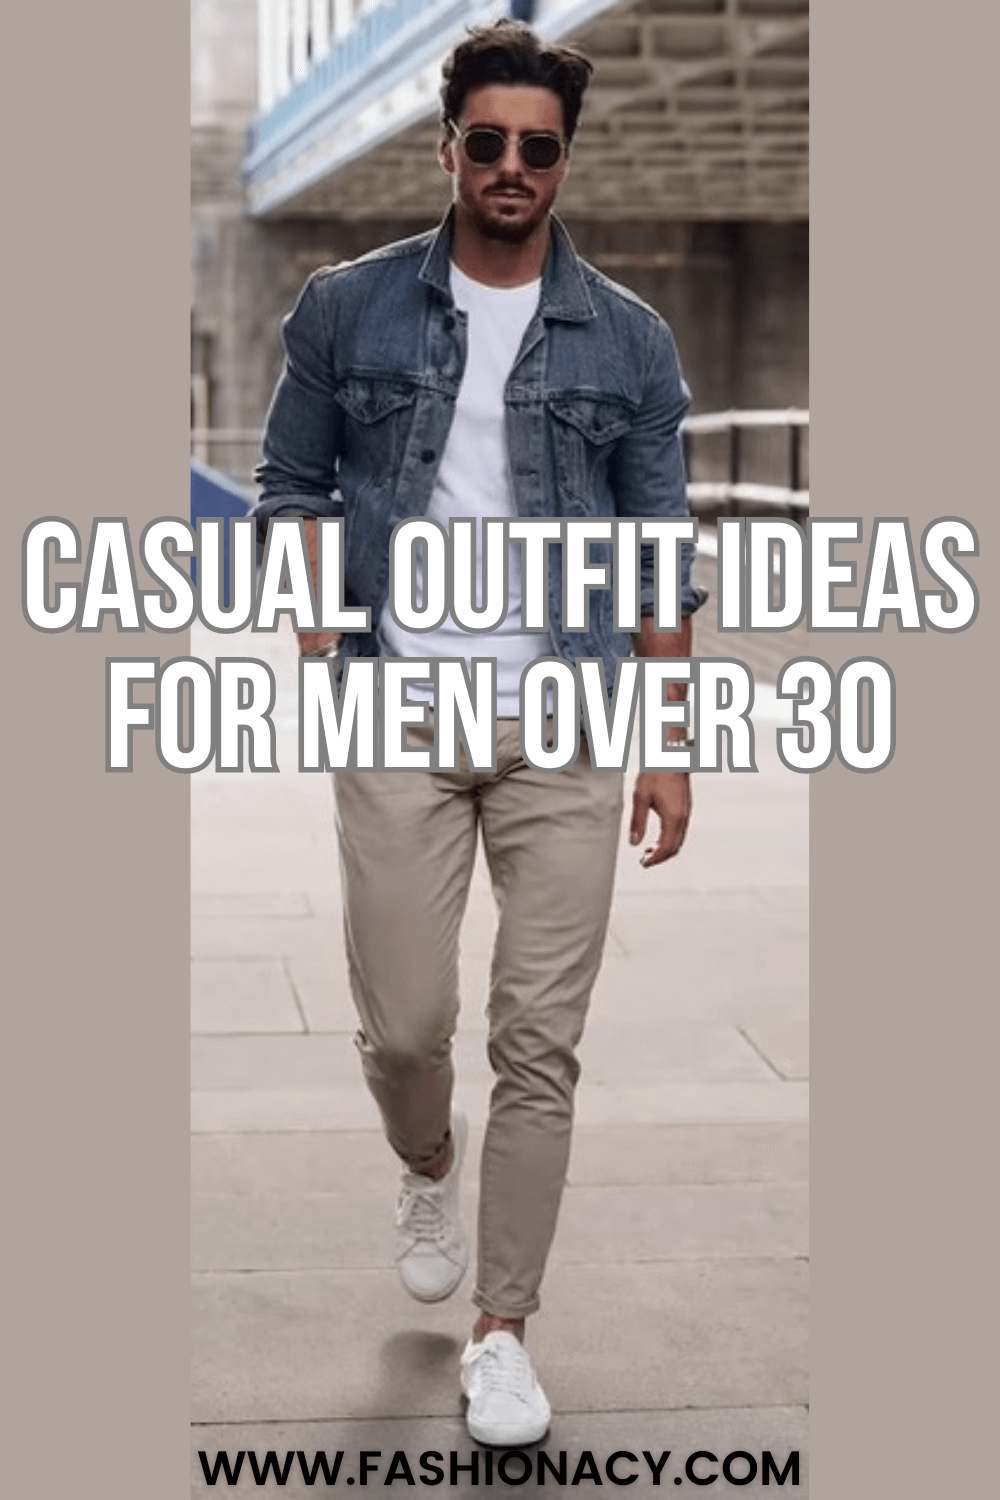 5 Casual Outfit Ideas For Men Over 30